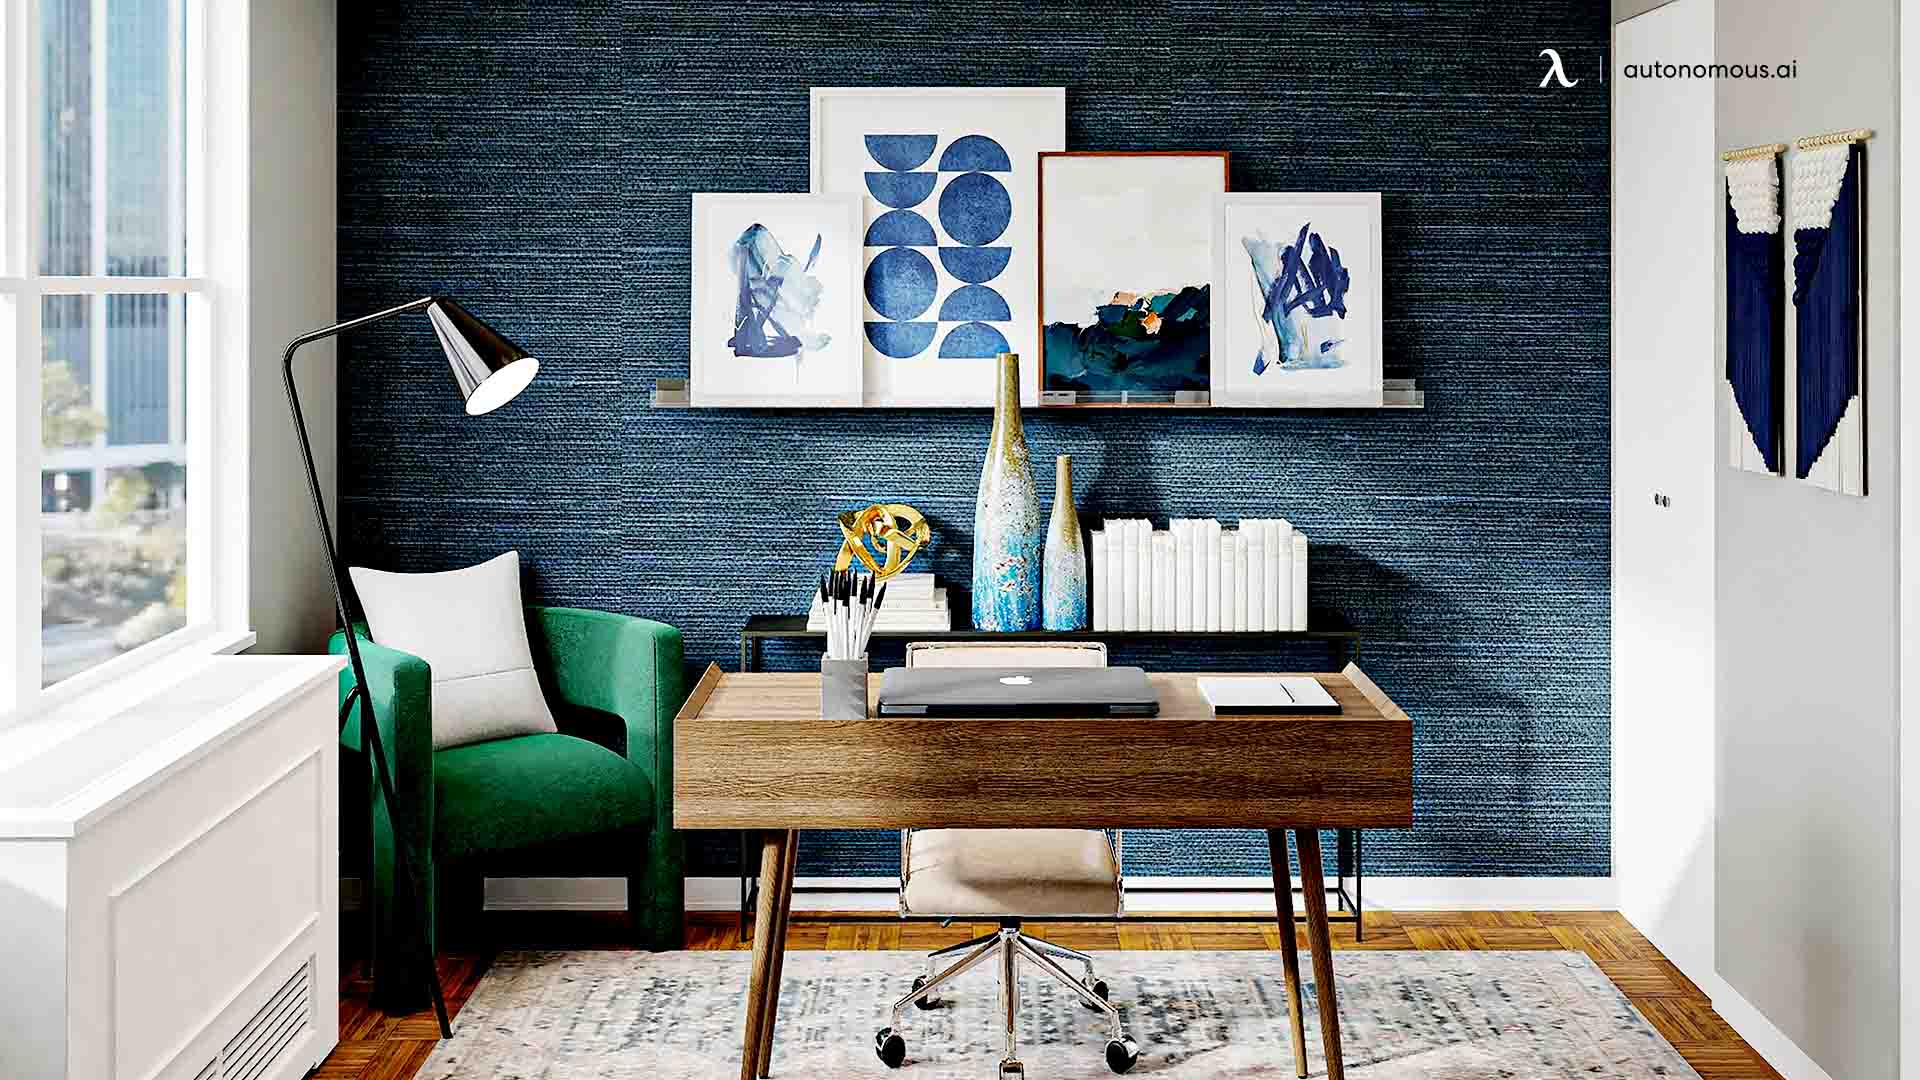 21 Office Wall Art Ideas | Living Spaces